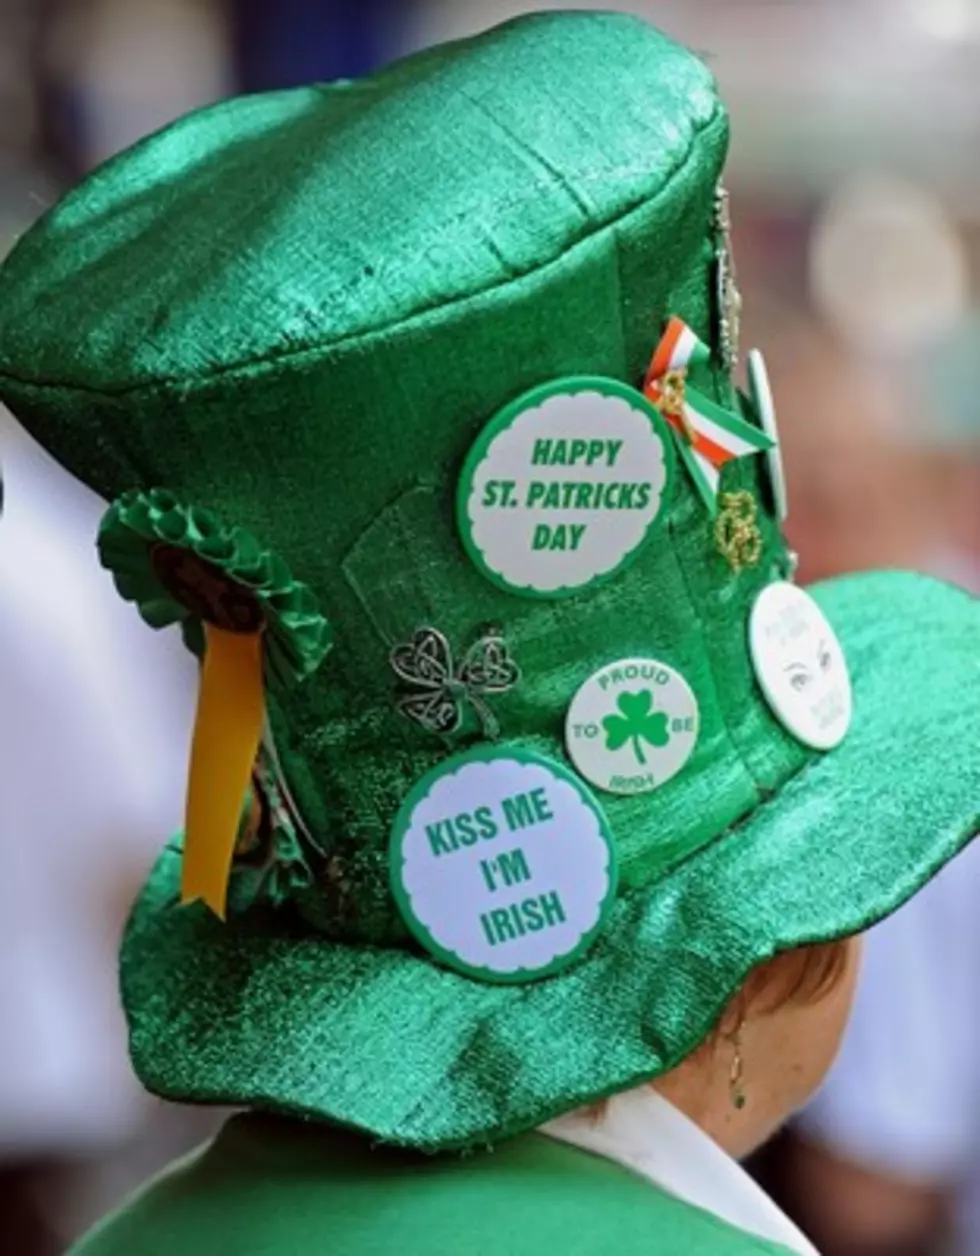 Nominations Sought For 2014 St. Patrick&#8217;s Day Parade Grand Marshal